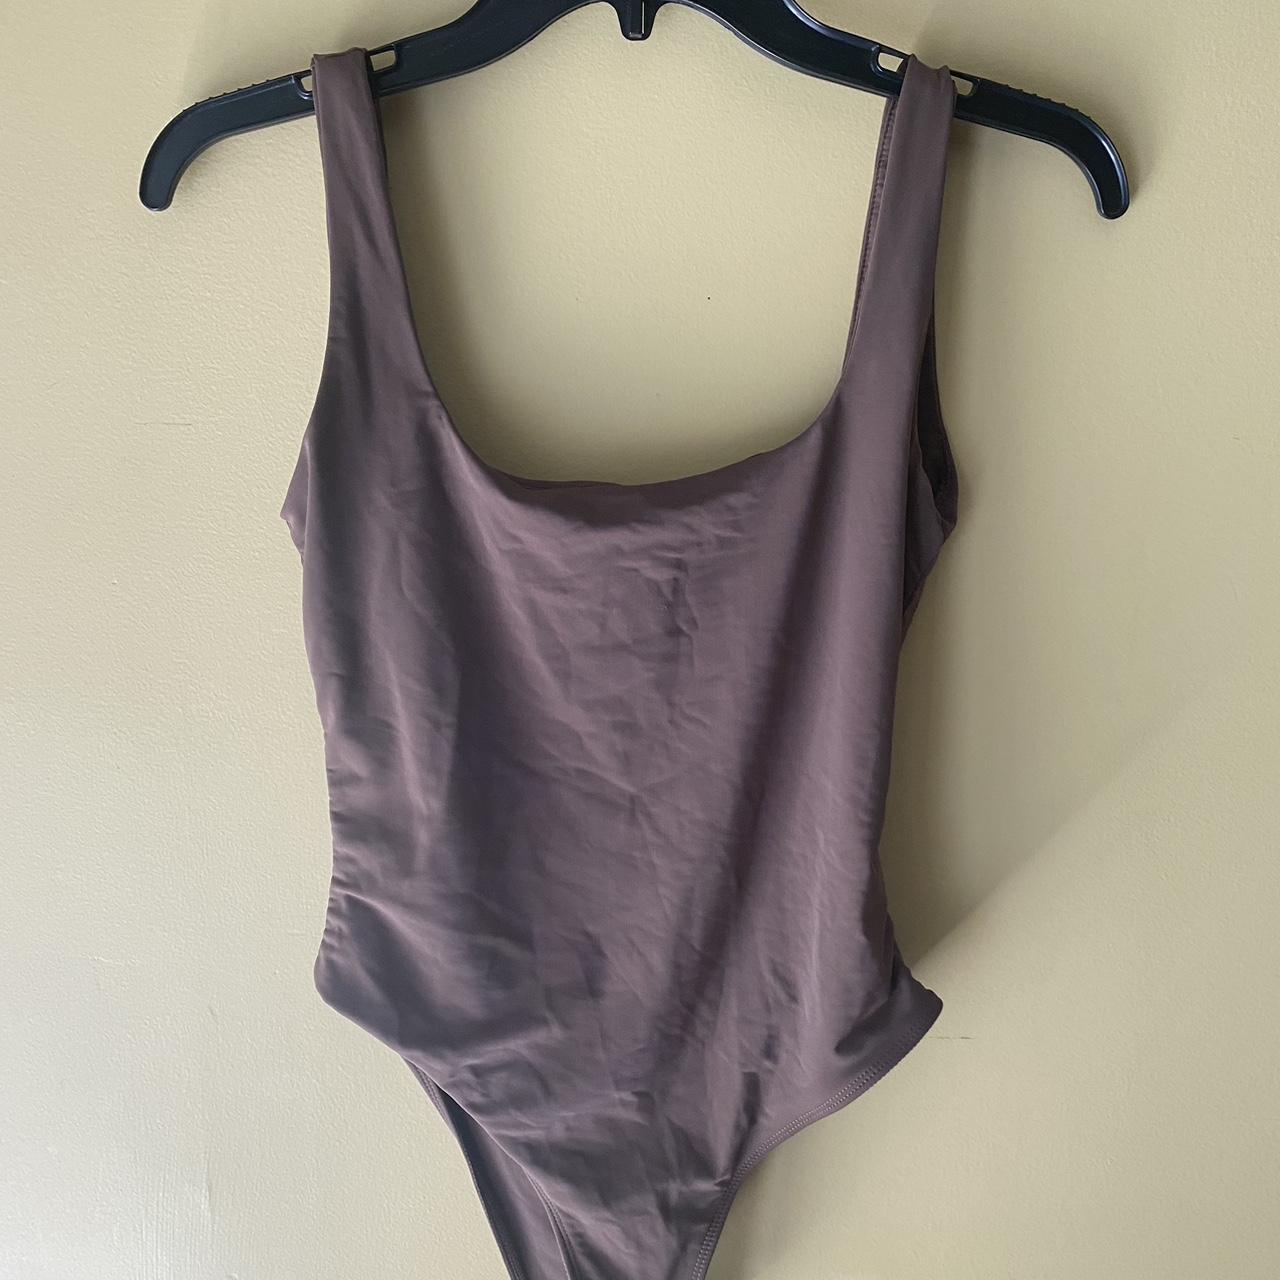 Skims knockoff bodysuit cute with jeans material is... - Depop